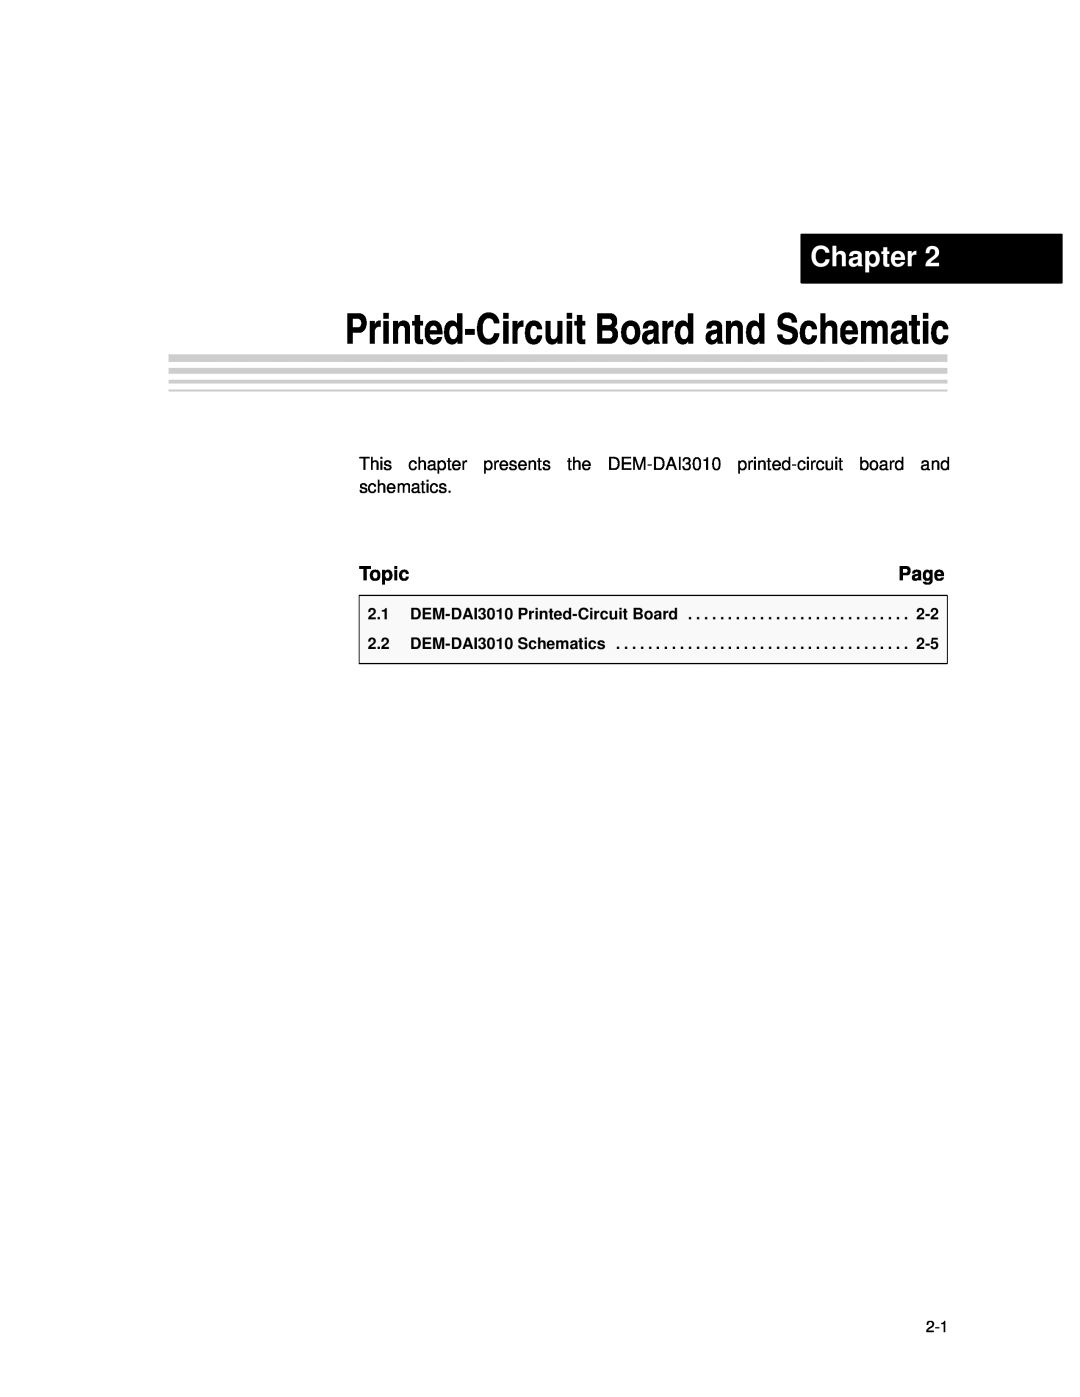 Texas Instruments manual Printed-CircuitBoard and Schematic, Chapter, Topic, DEM-DAI3010 Printed-CircuitBoard 